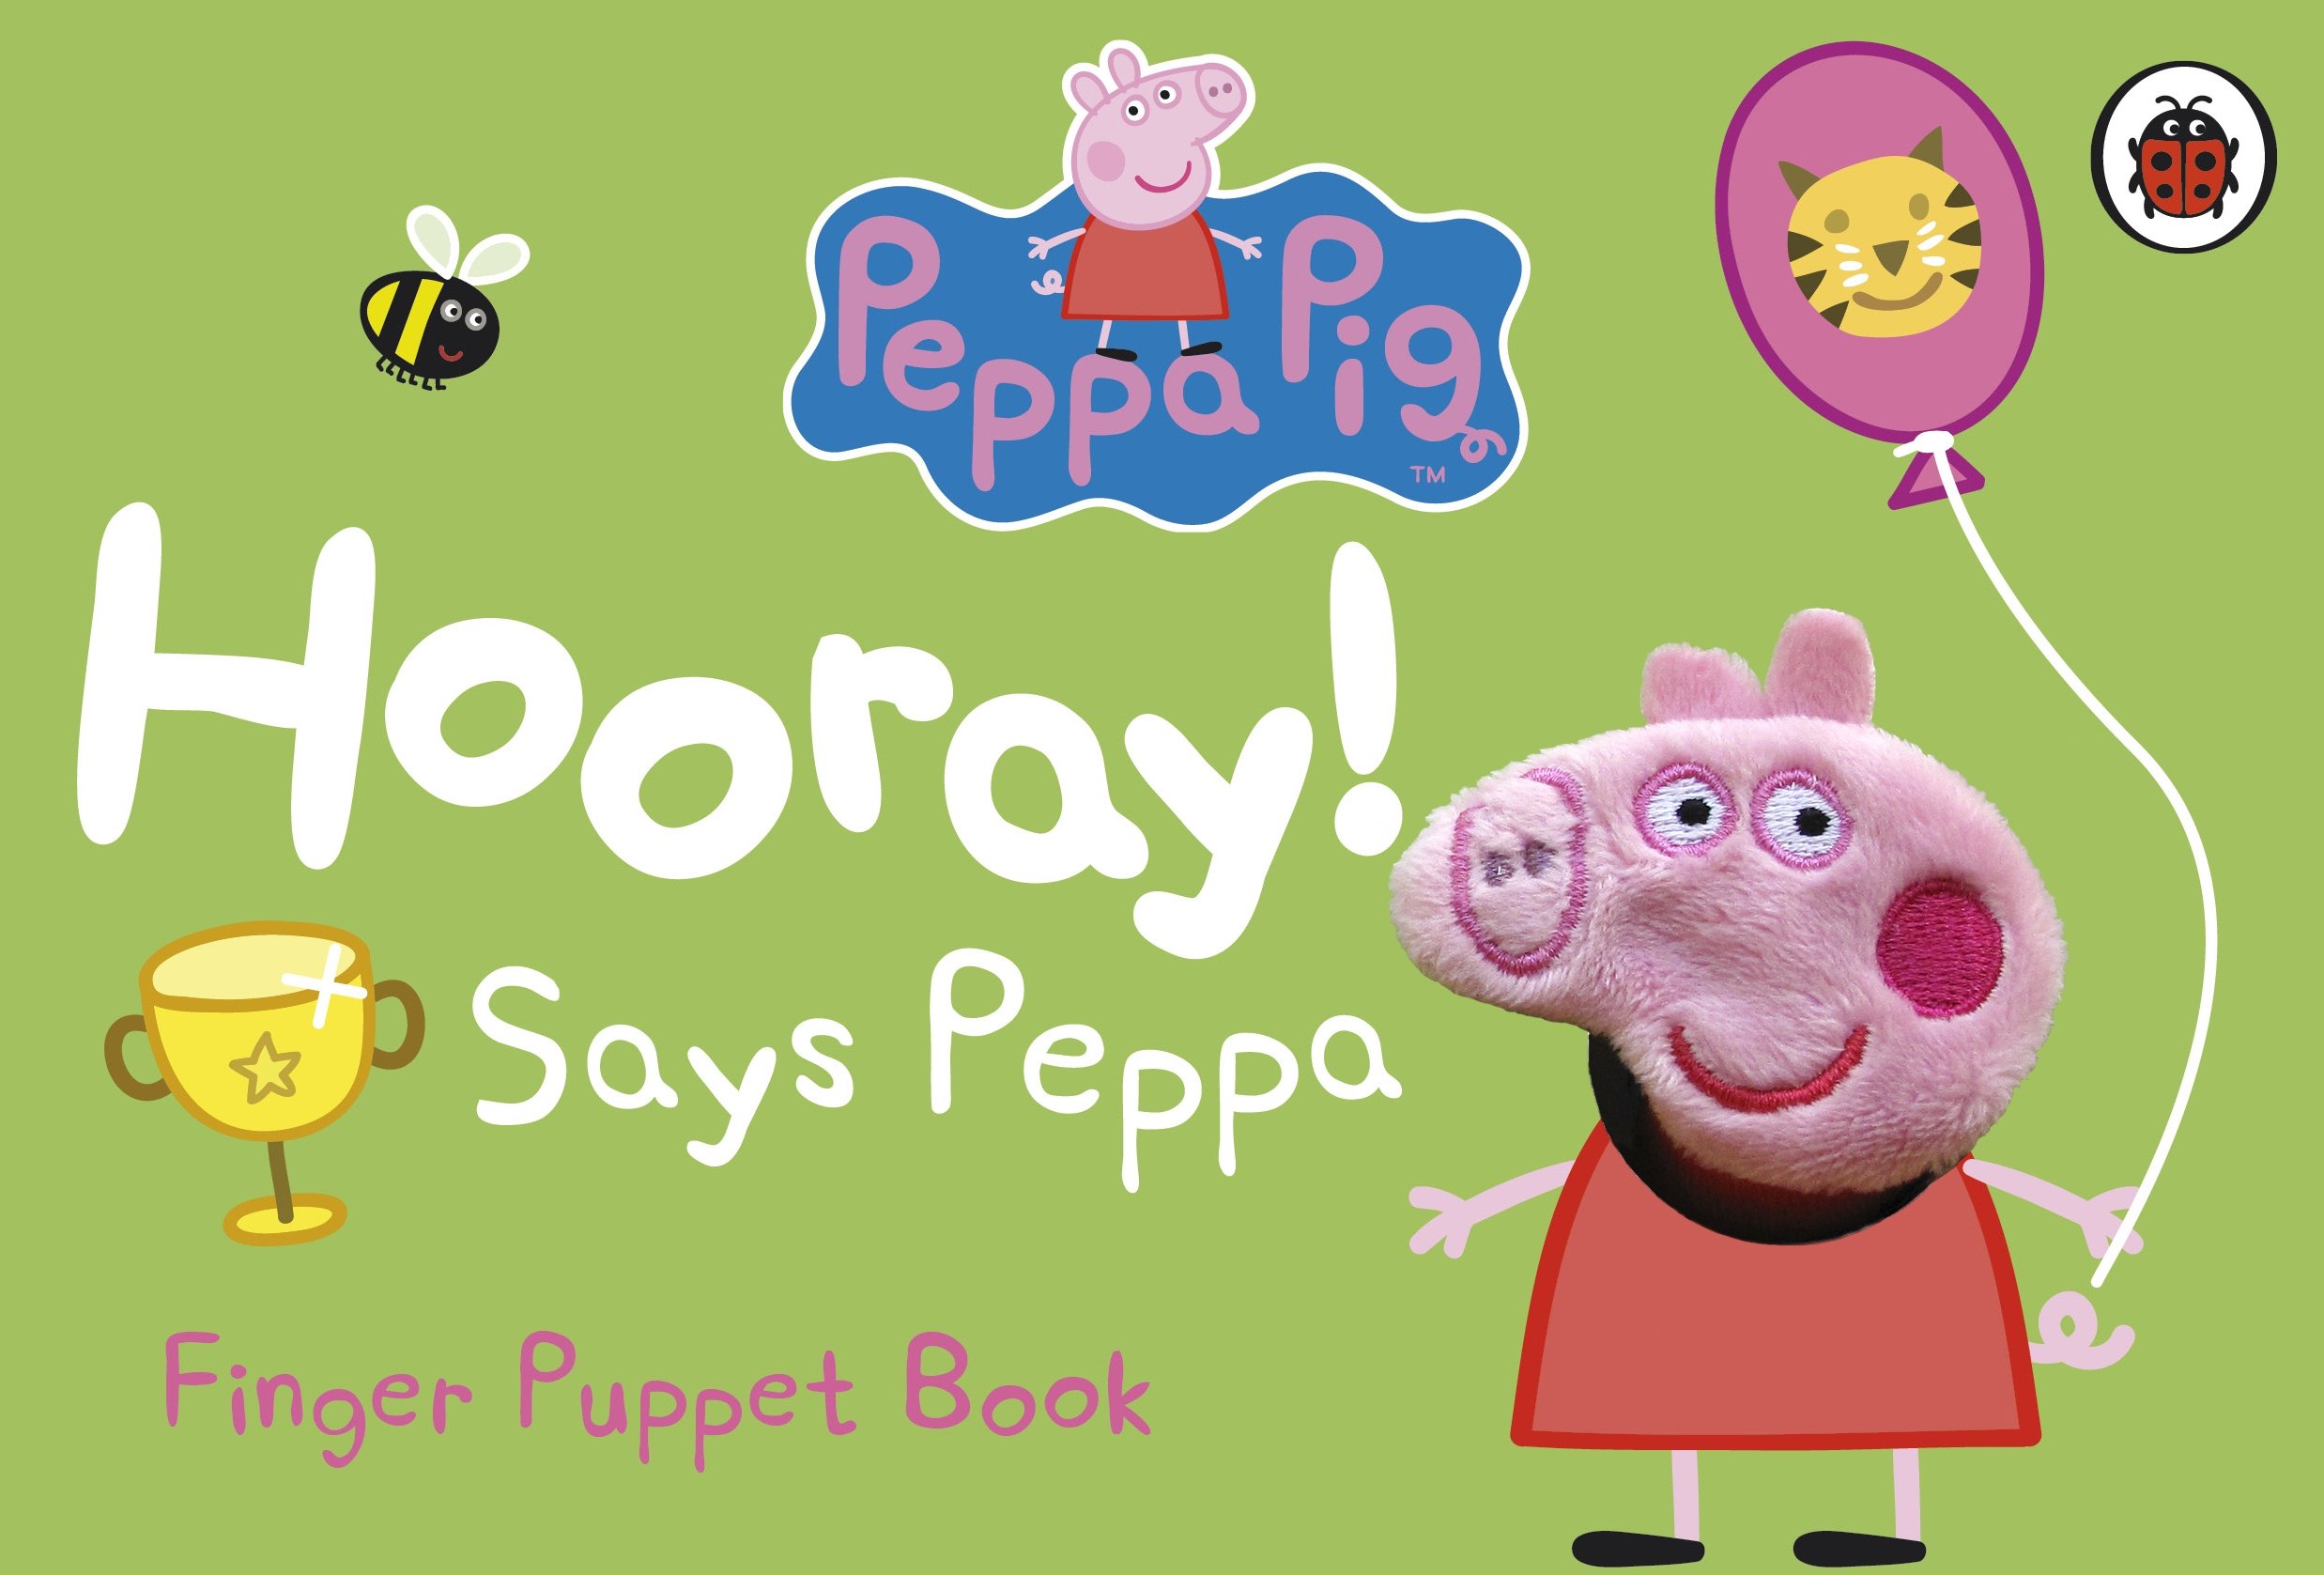 says peppa finger puppet book,【粉红猪小妹】万岁!手偶书